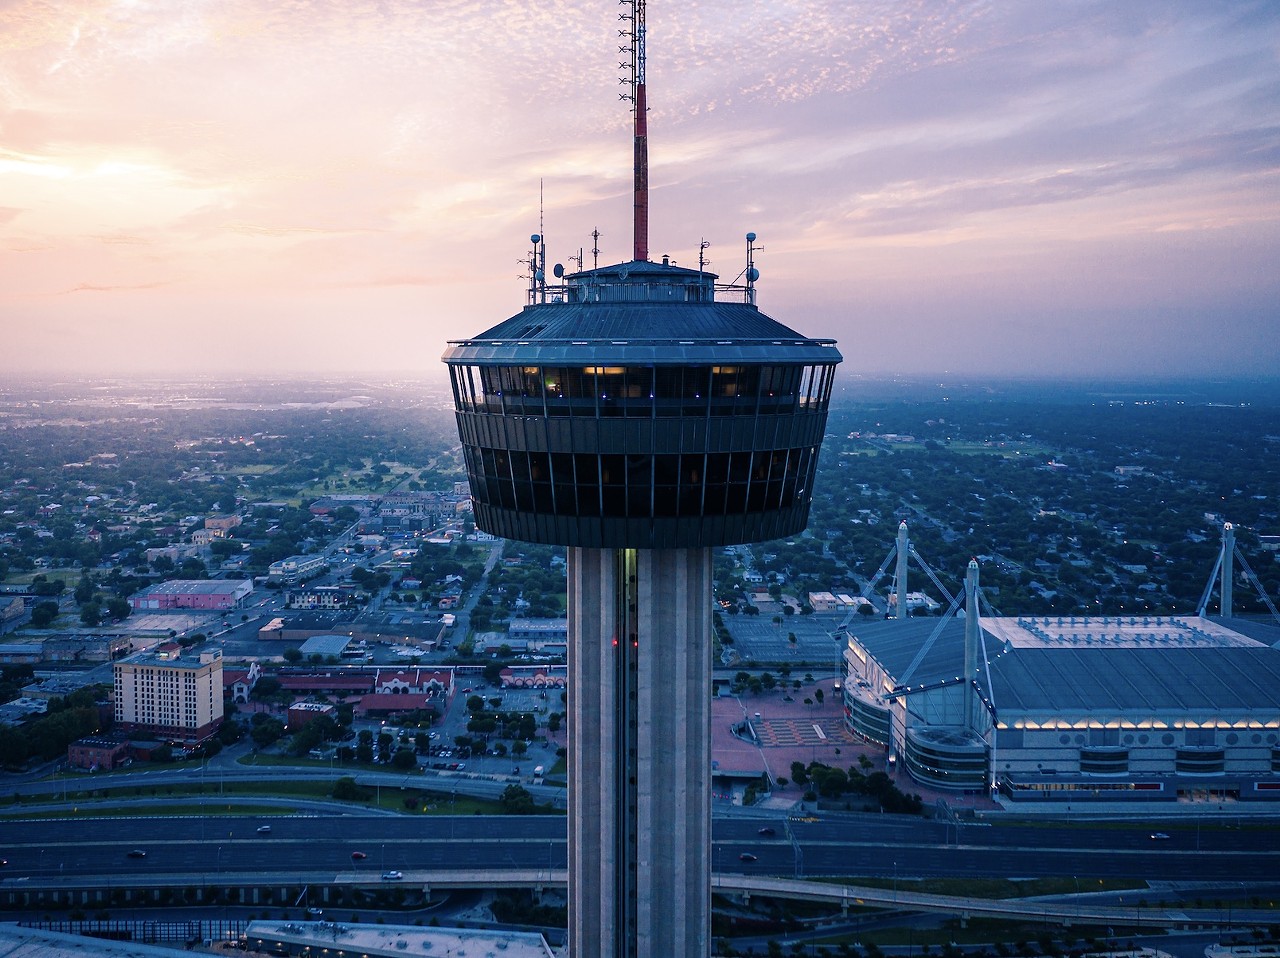 Have dinner at the Tower of the Americas
739 E. César E. Chávez Blvd., (210) 223-3101, toweroftheamericas.com
Dinner with a view? Sign us up. The next time you can’t decide where to eat for date night, knock this off your unofficial San Antonio bucket list.